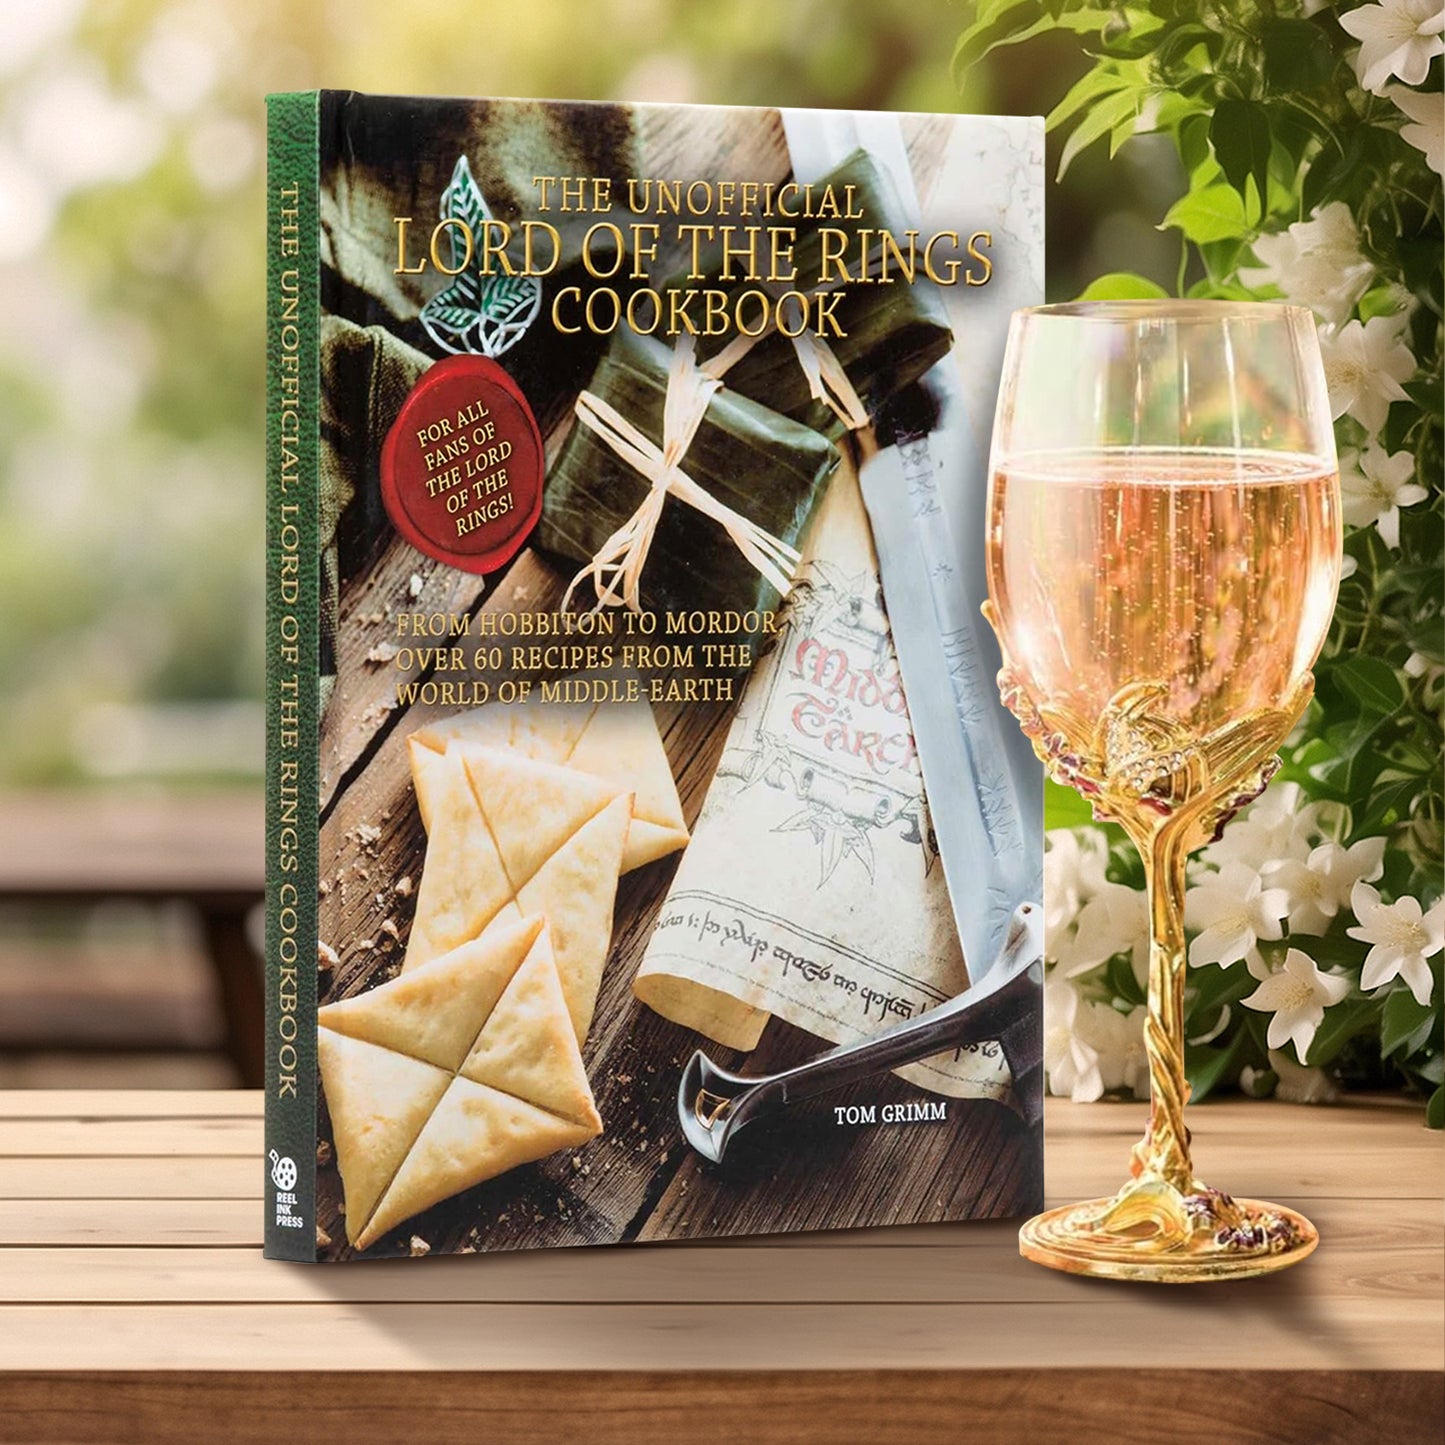 A copy of "The Unofficial Lord of the Rings Cookbook". The cover also reads "For all fans of Lord of the Rings" and "From Hobbiton to Mordor: Over 60 Recipes From the World of Middle-Earth - by Tom Grimm". The book is sitting beside a gold goblet/glass of a sparkling beverage.